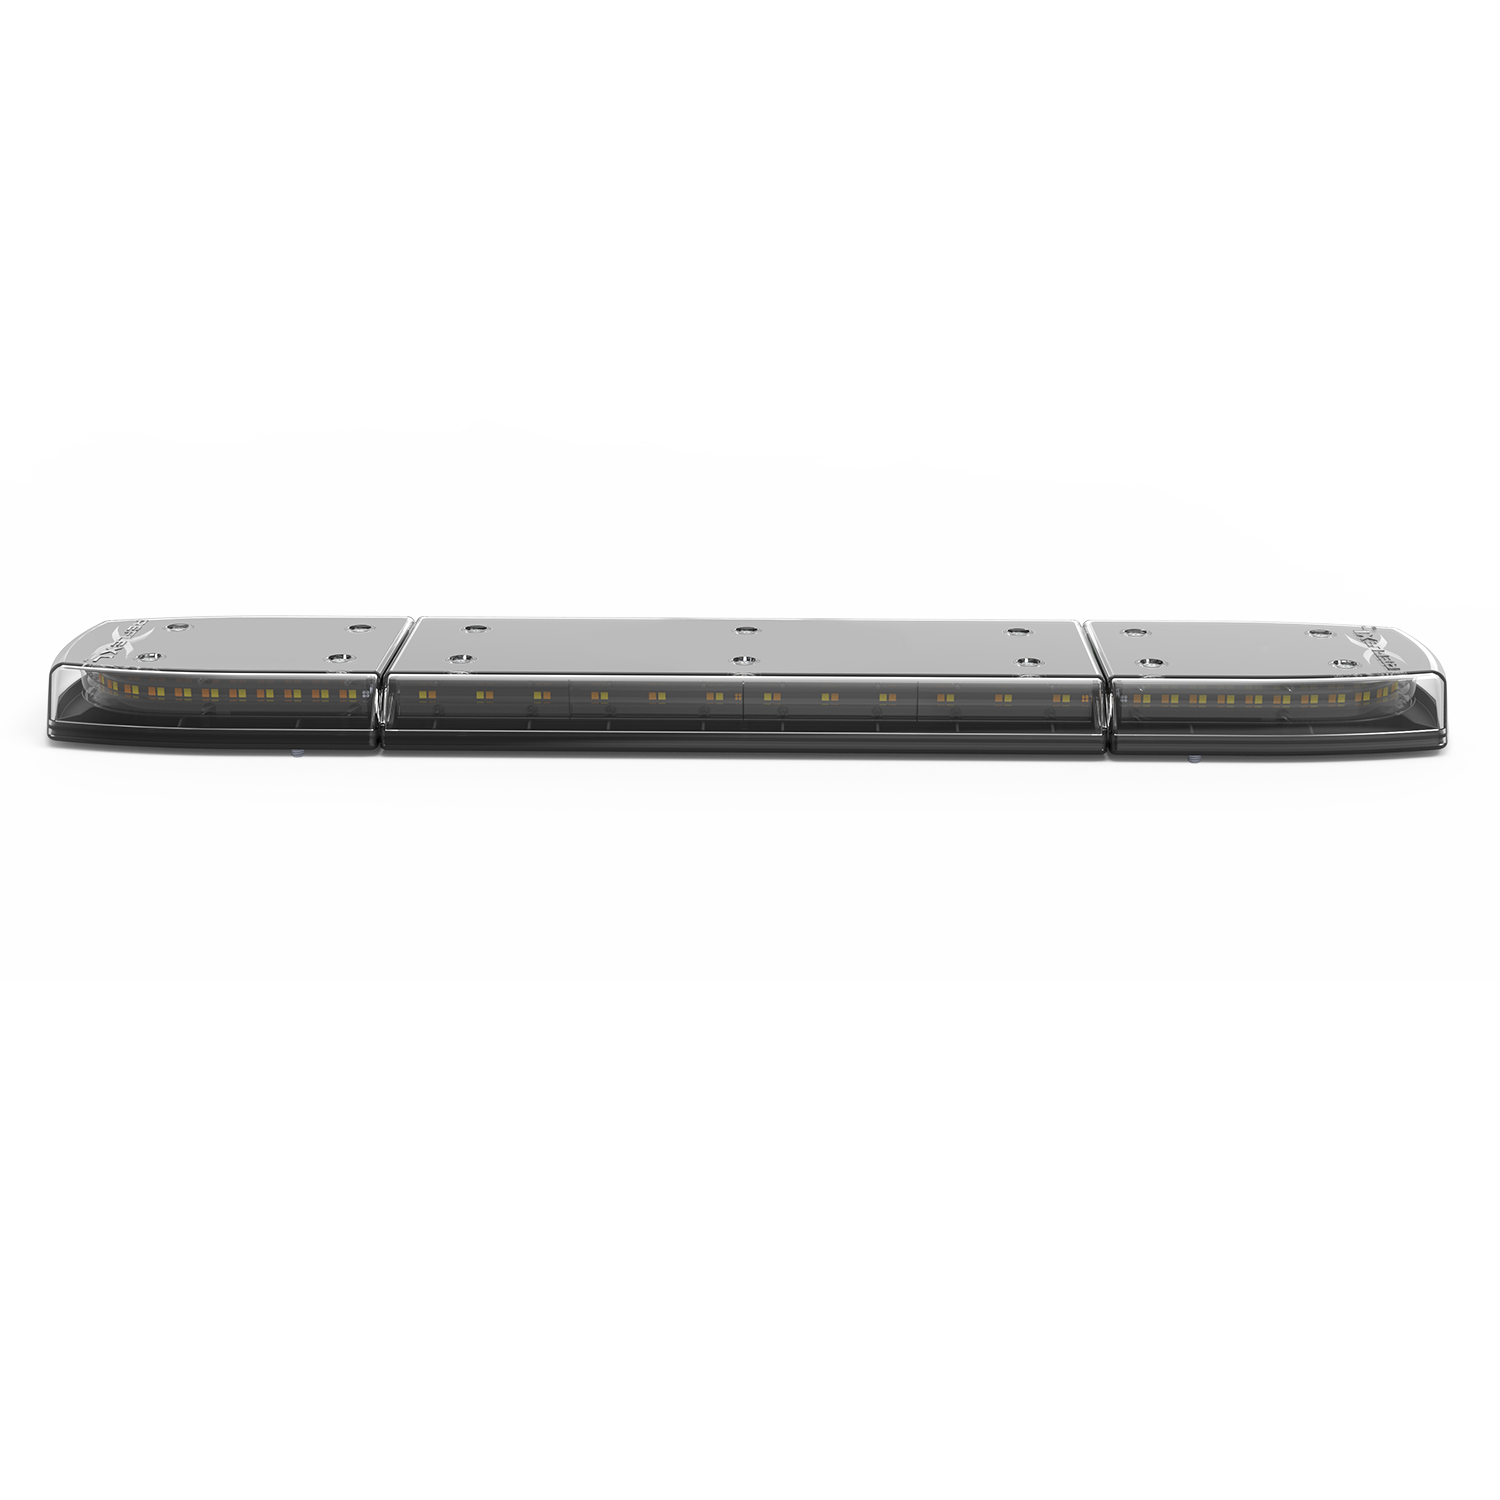 Featured image for “11 Series RefleXL® Narrow LED Lightbar”